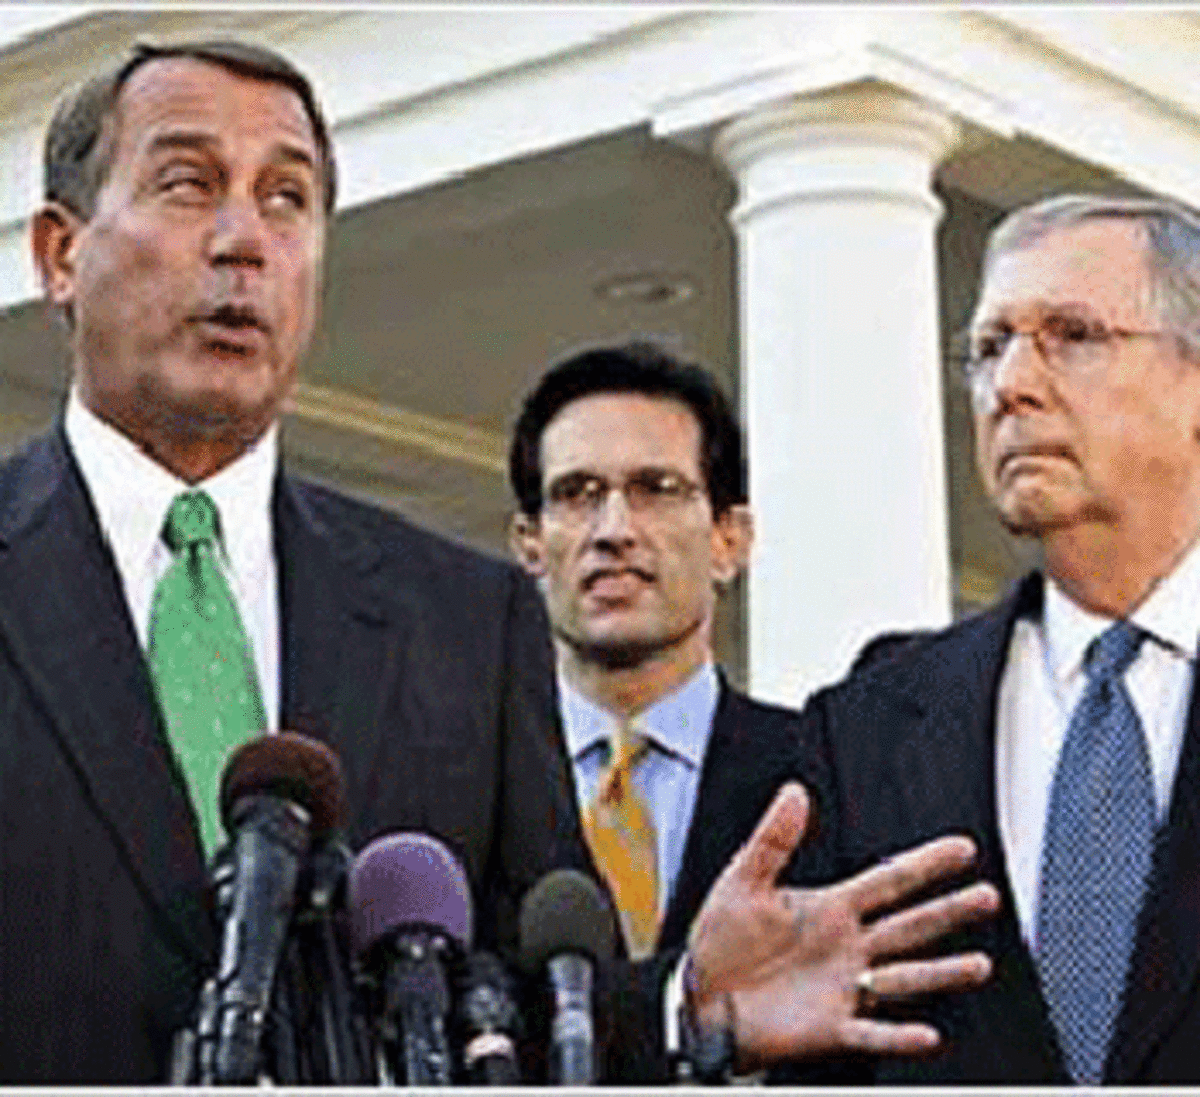 John Boehner, Eric Cantor, Mitch McConnell